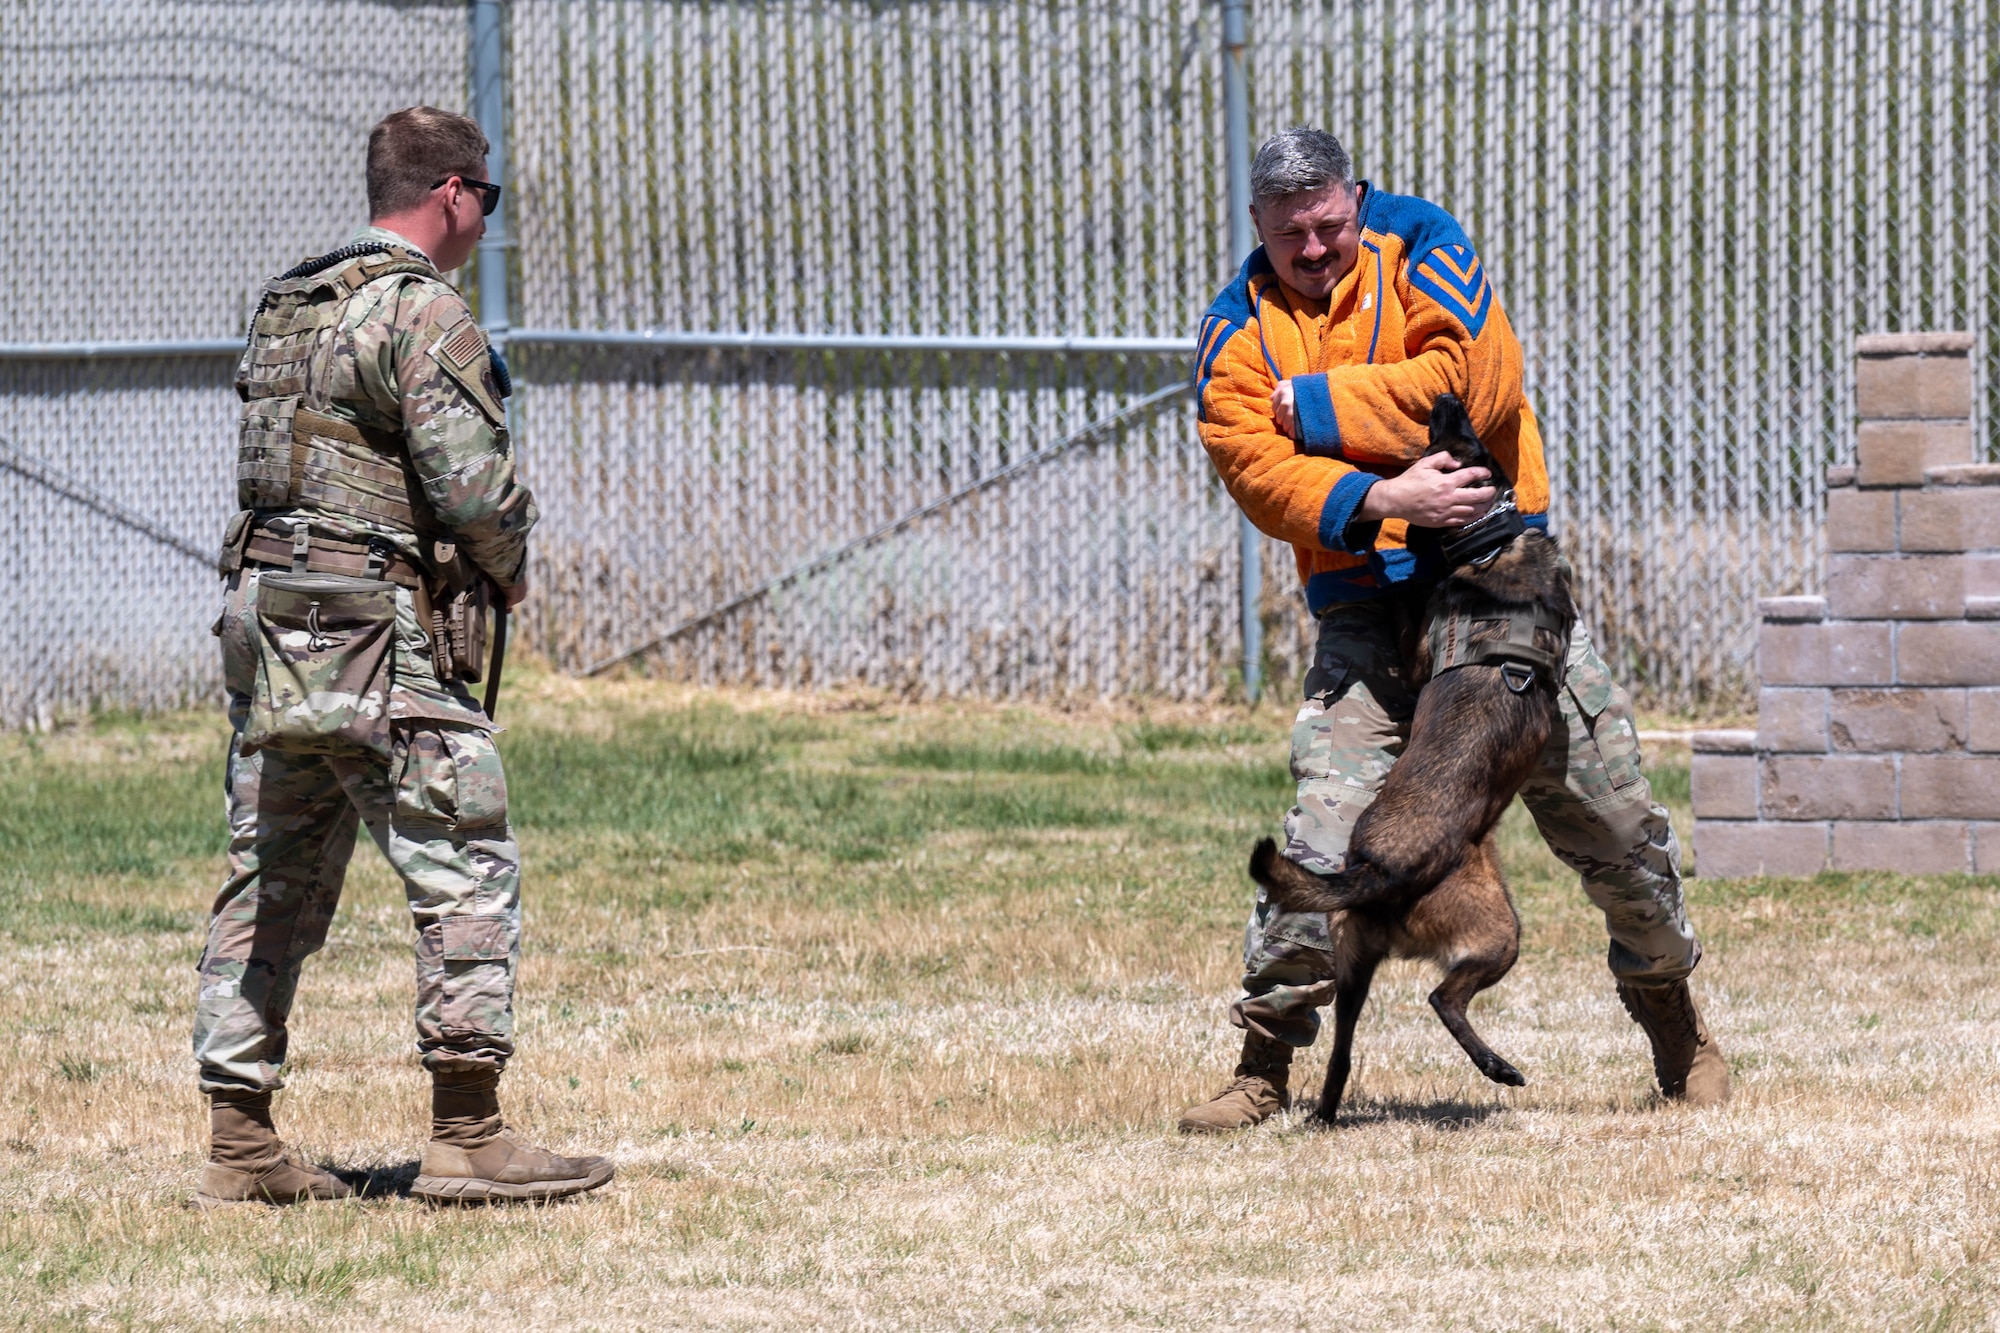 Military working dog handlers perform a demonstration of their partners during a recent visit by base leadership to the MWD facility on Edwards Air Force Base, California. (Air Force photo by Harley Huntington)